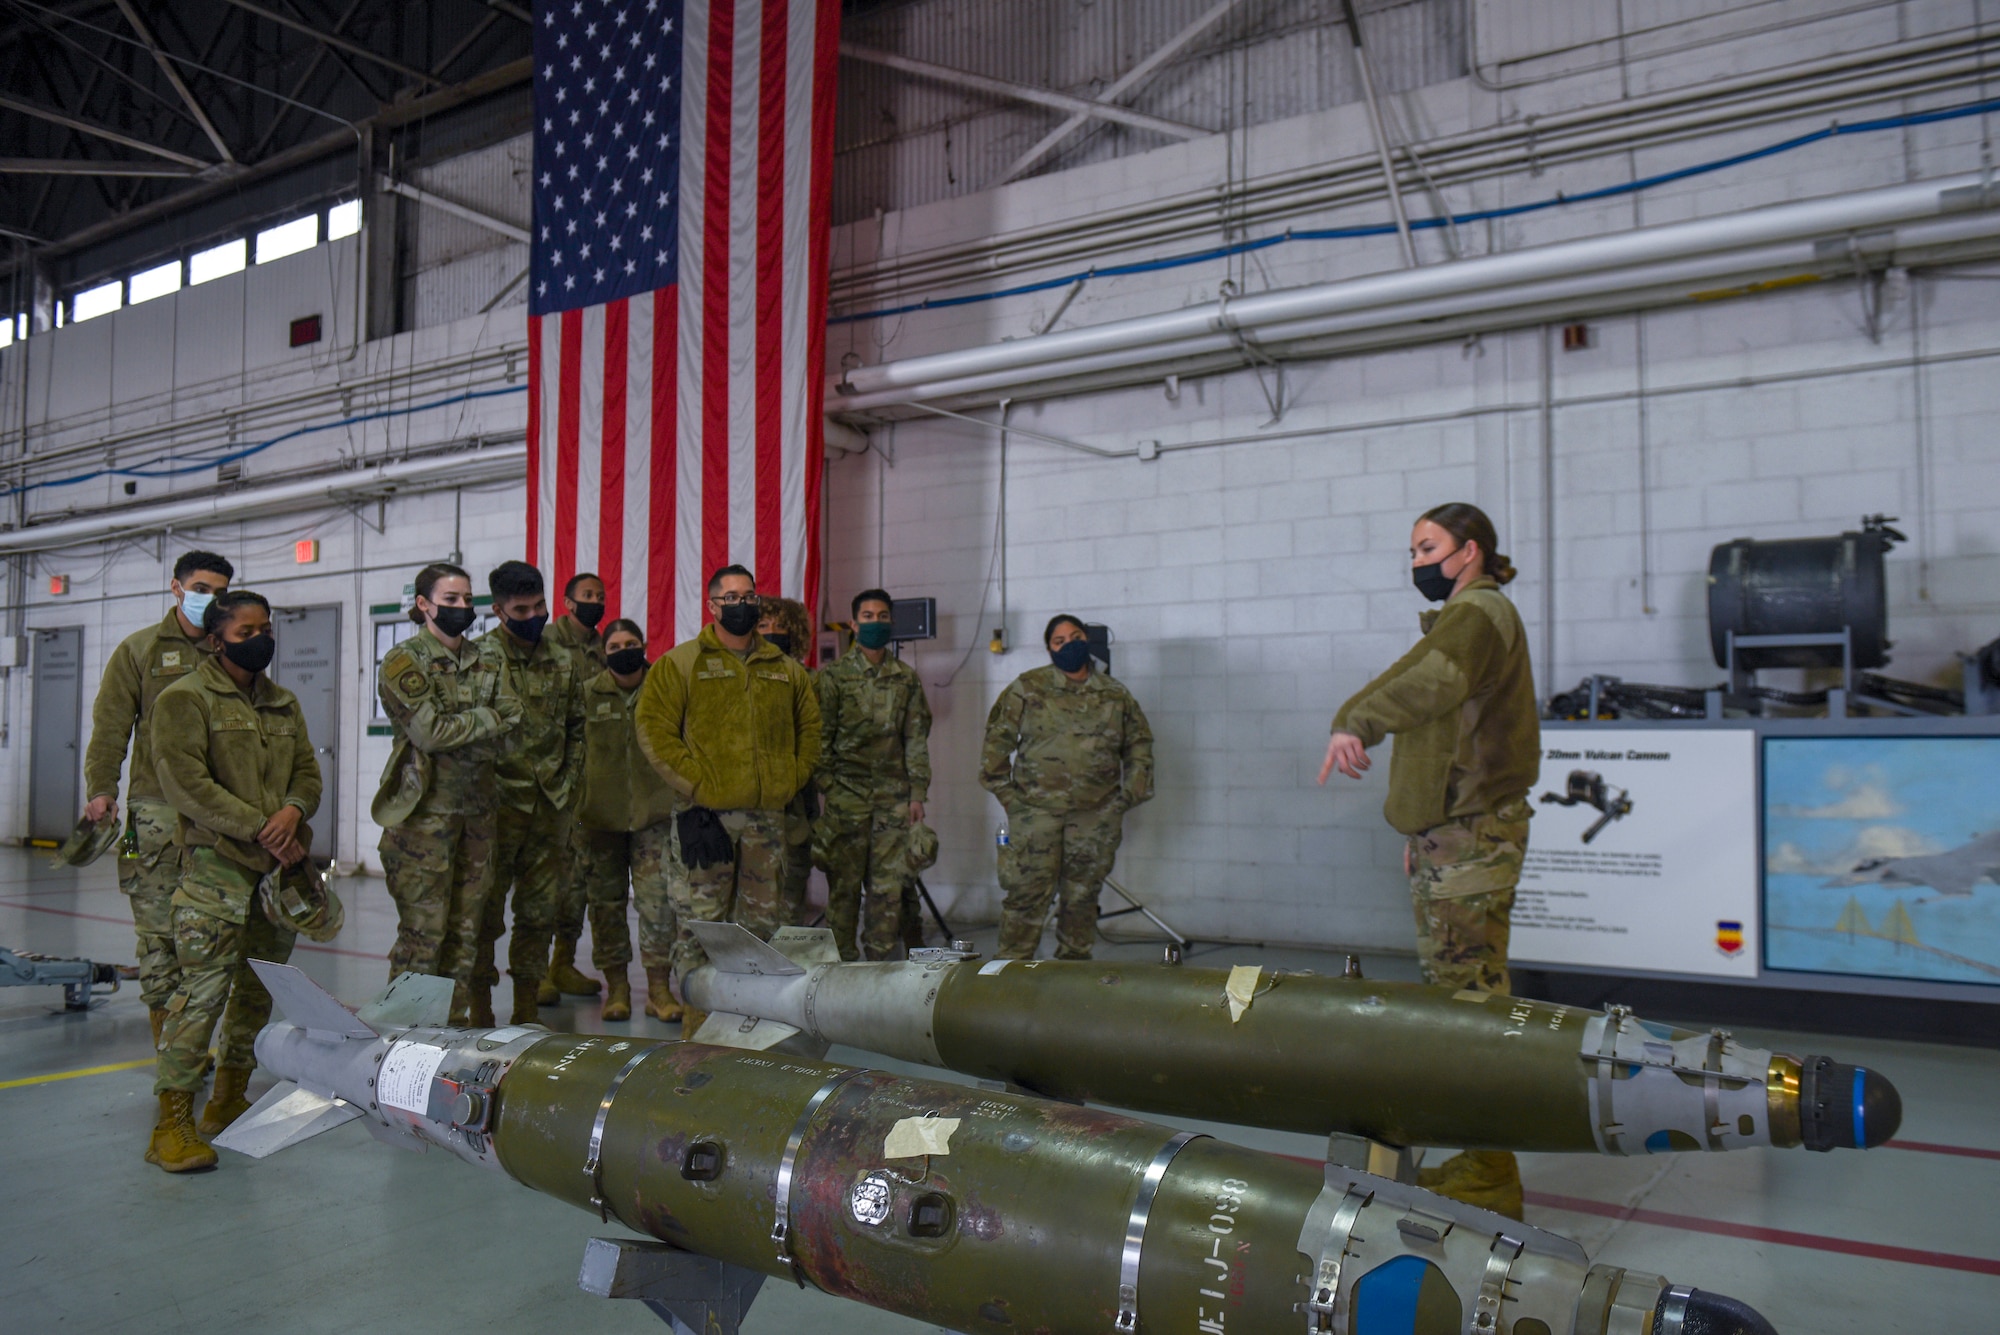 A group of Airmen take part in a tour of the 20th Maintenance Group.